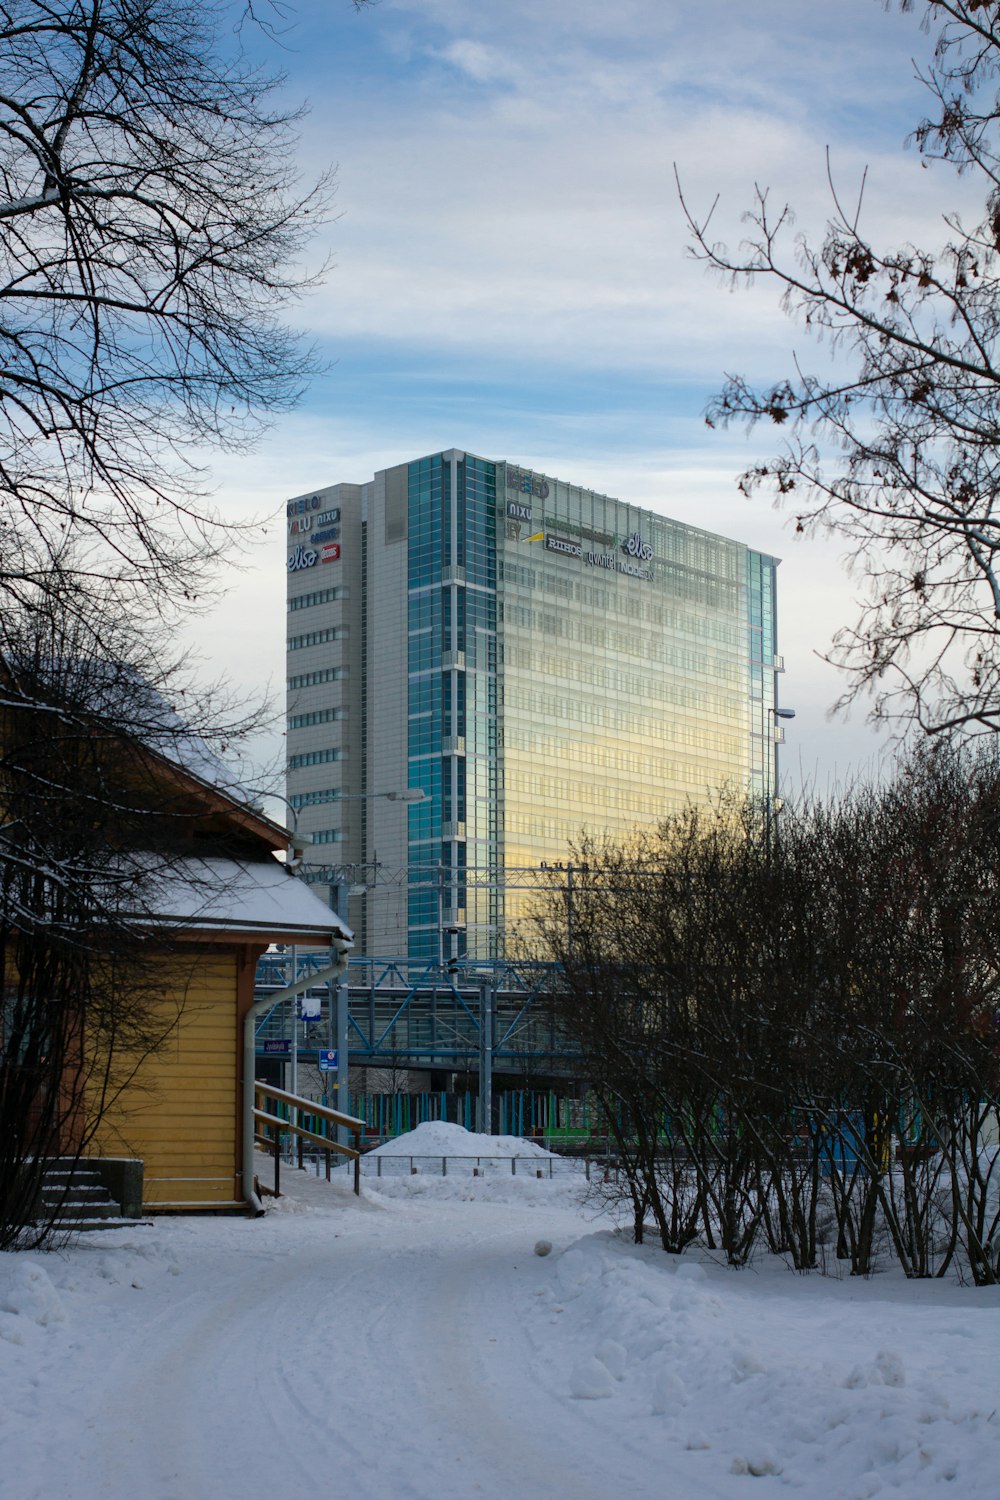 a very tall building in the middle of a snowy area